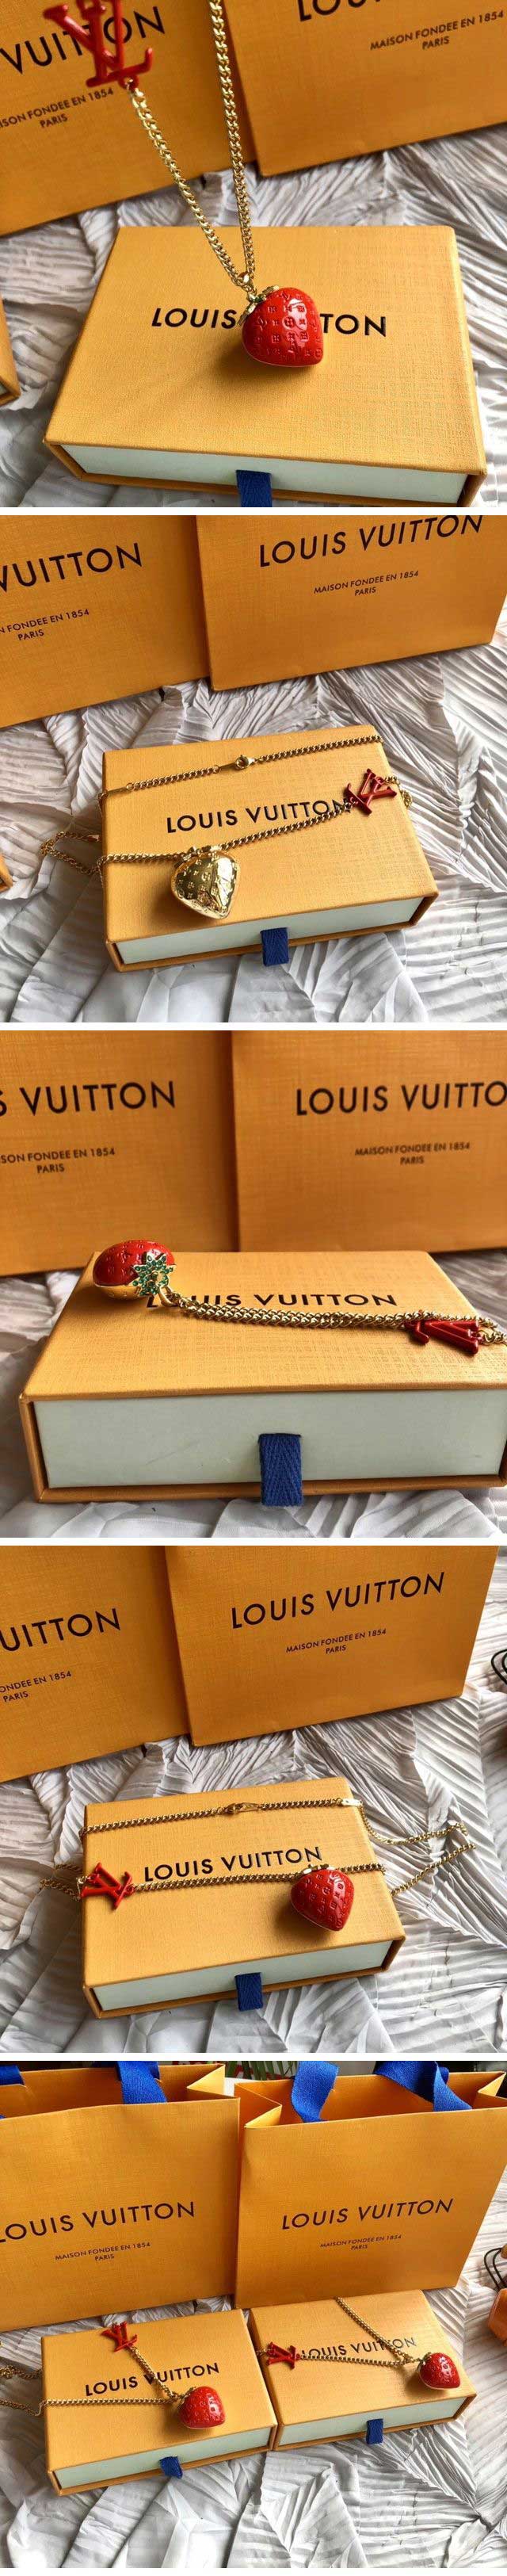 Louis Vuitton Monogram Fruits Strawberry Necklace ルイヴィトン モノグラム フルーツ ストロベリー ネックレス